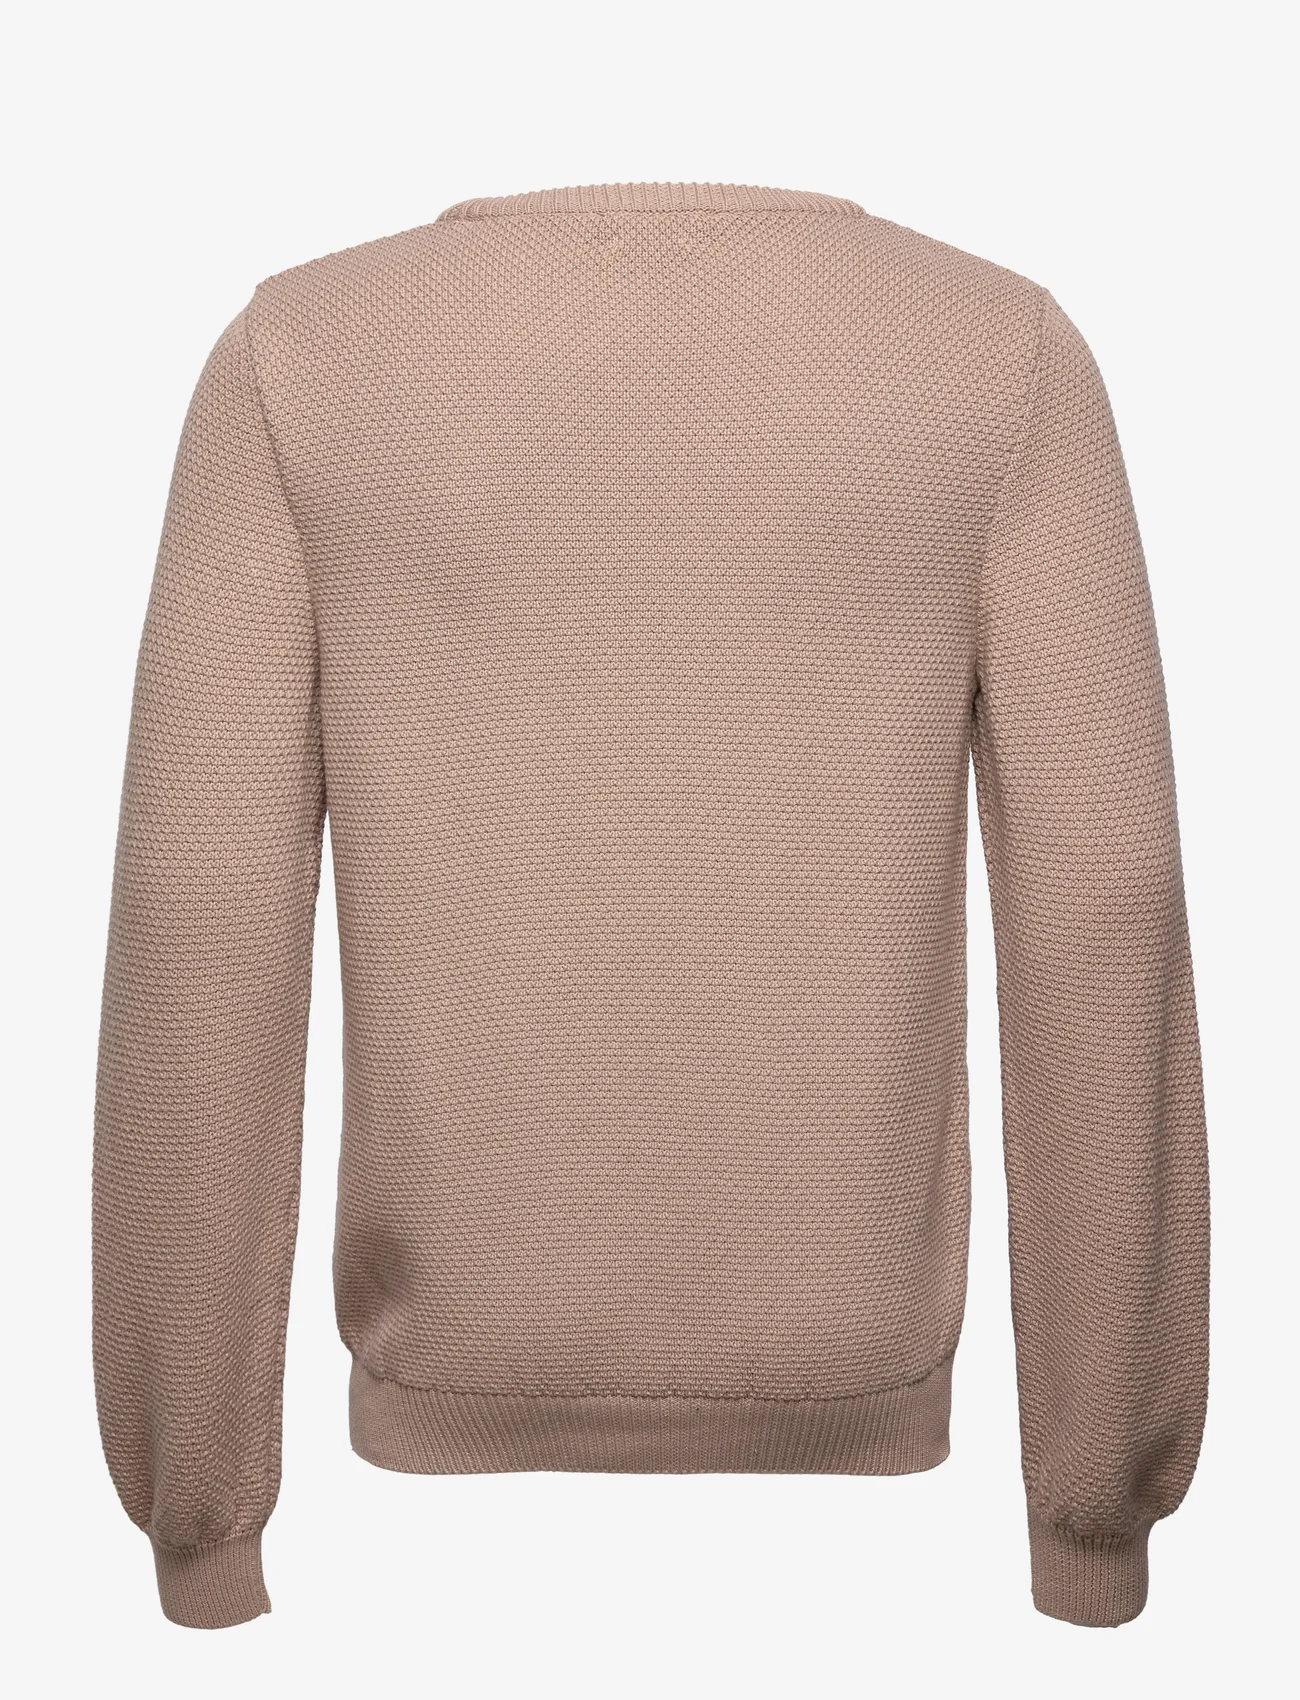 By Garment Makers - The Organic Waffle knit - basisstrikkeplagg - light taupe - 1